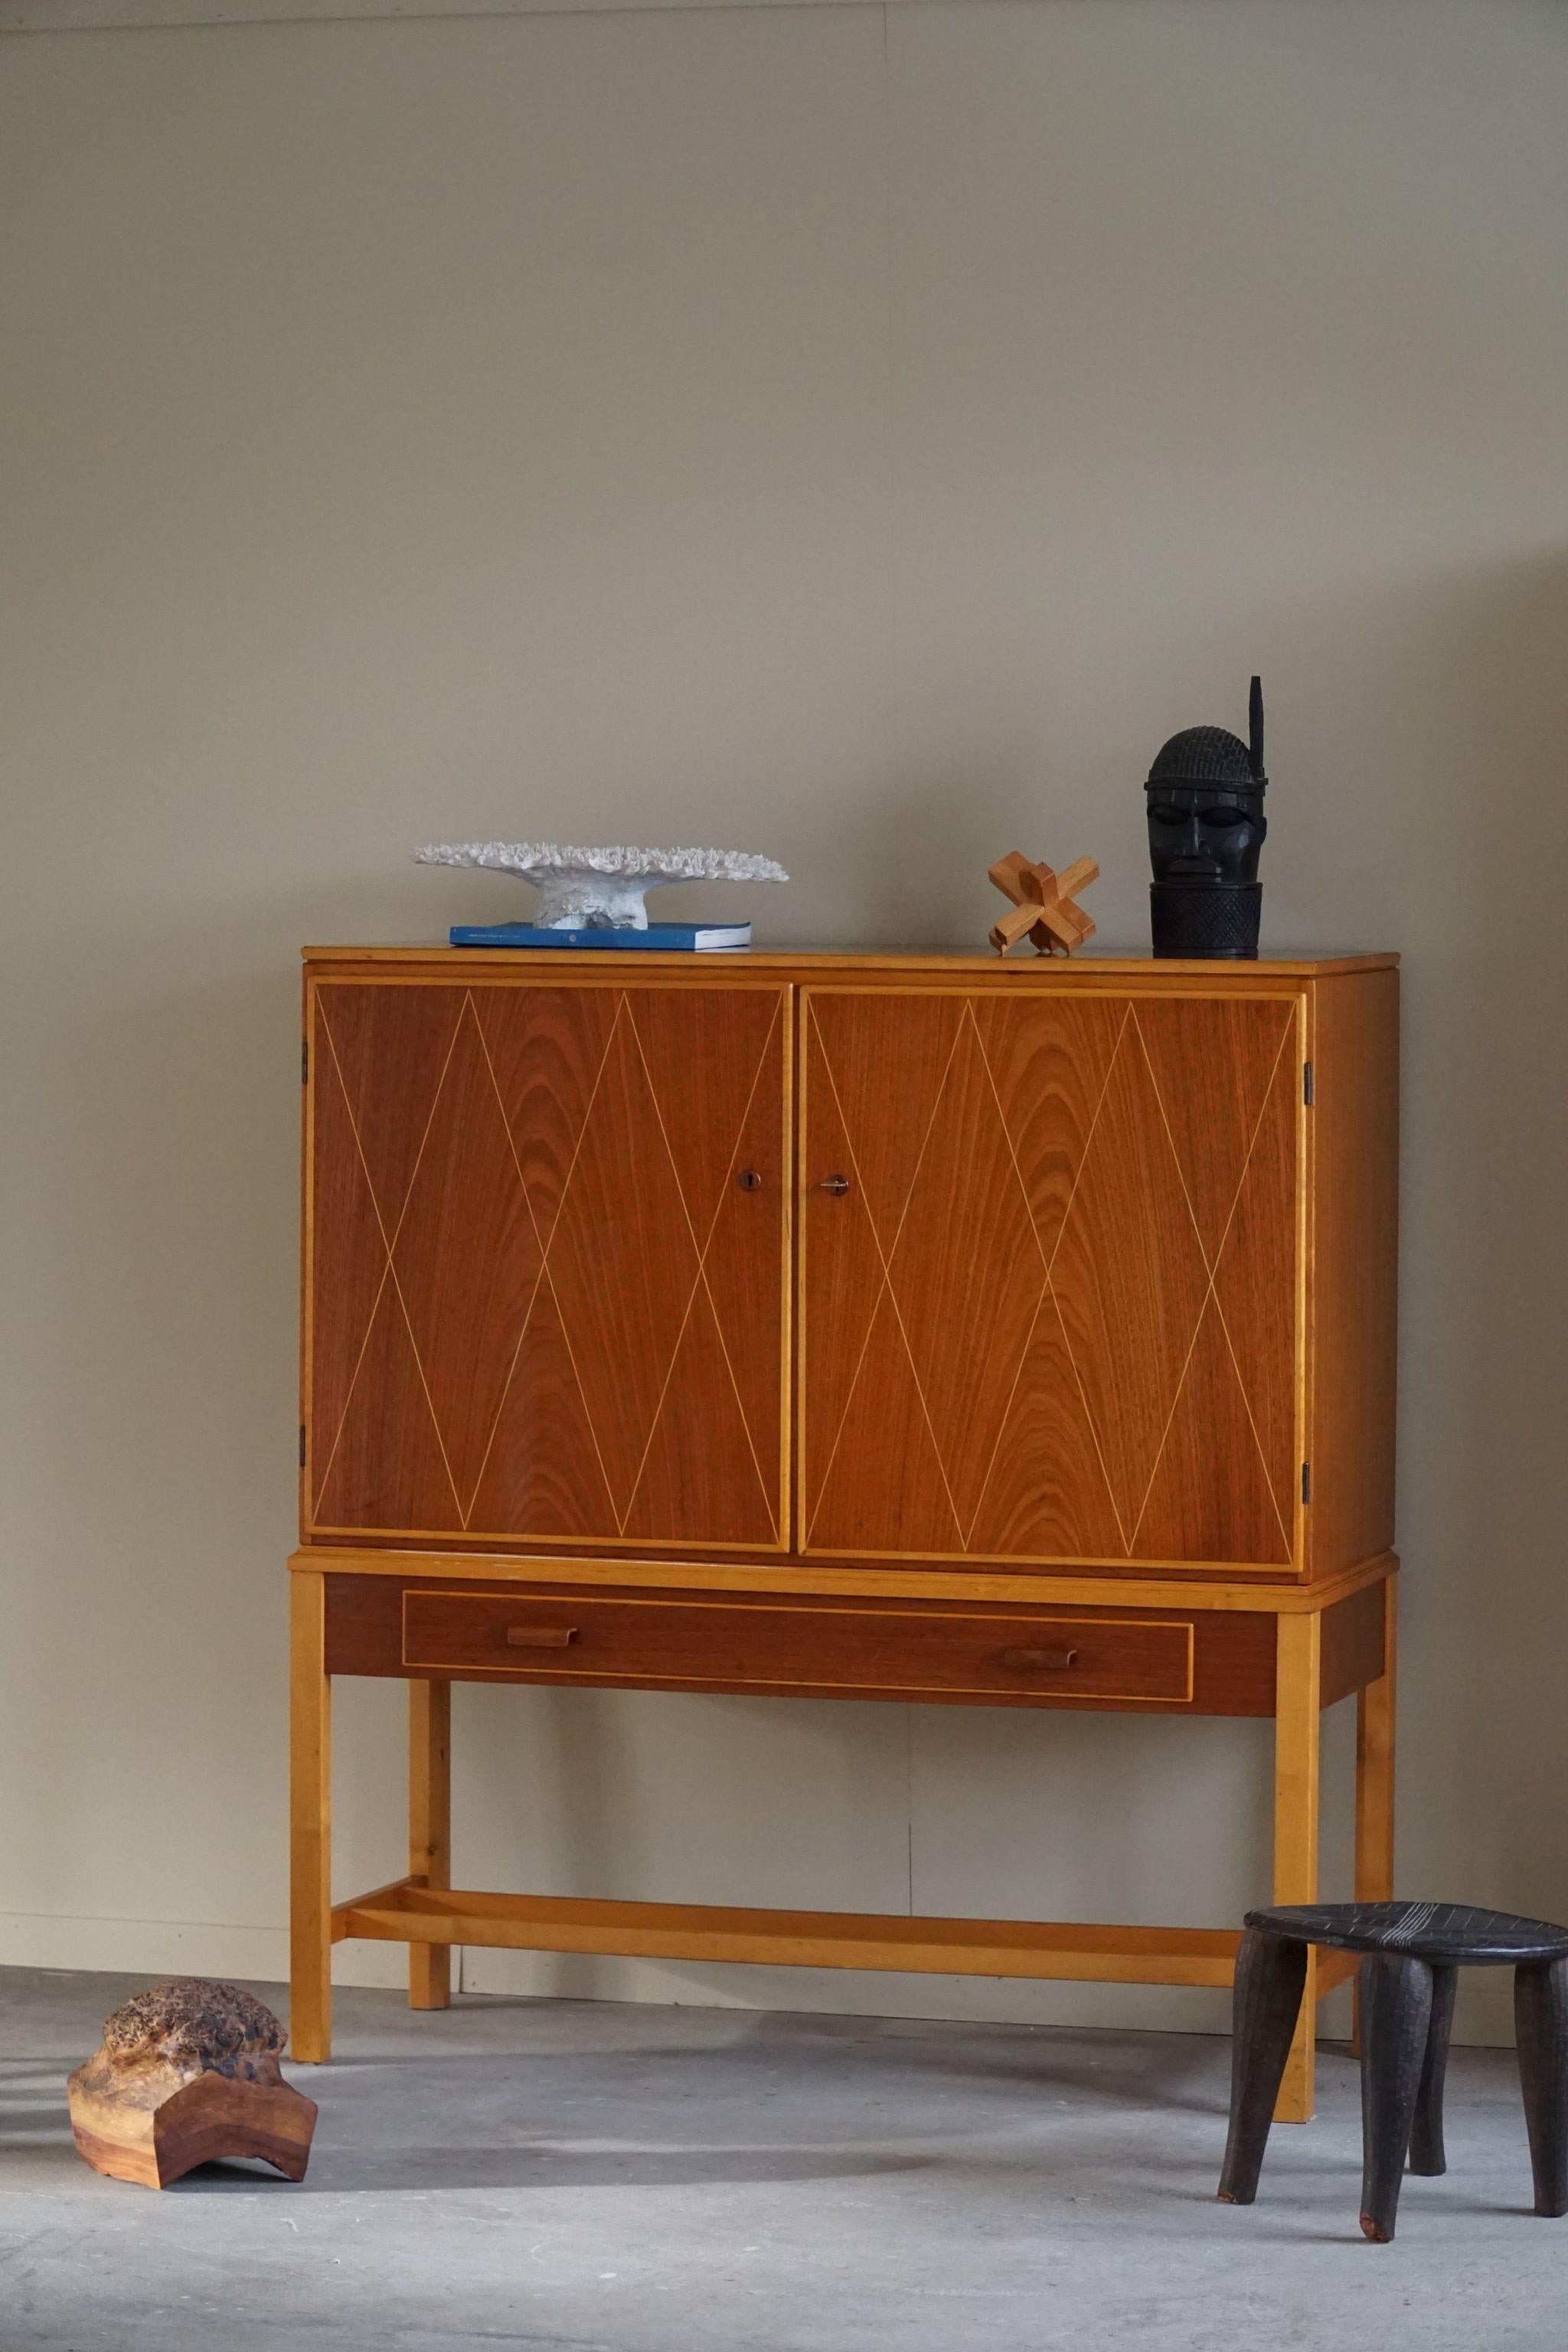 Rare cabinet with highlighted details, made in teak and birch. Designed by Carl-Axel Acking for Nordiska Kompaniet, Sweden 1950s. 

A fine mid century vintage piece that pair well with many types of interior styles. A Modern, Scandinavian, Classic